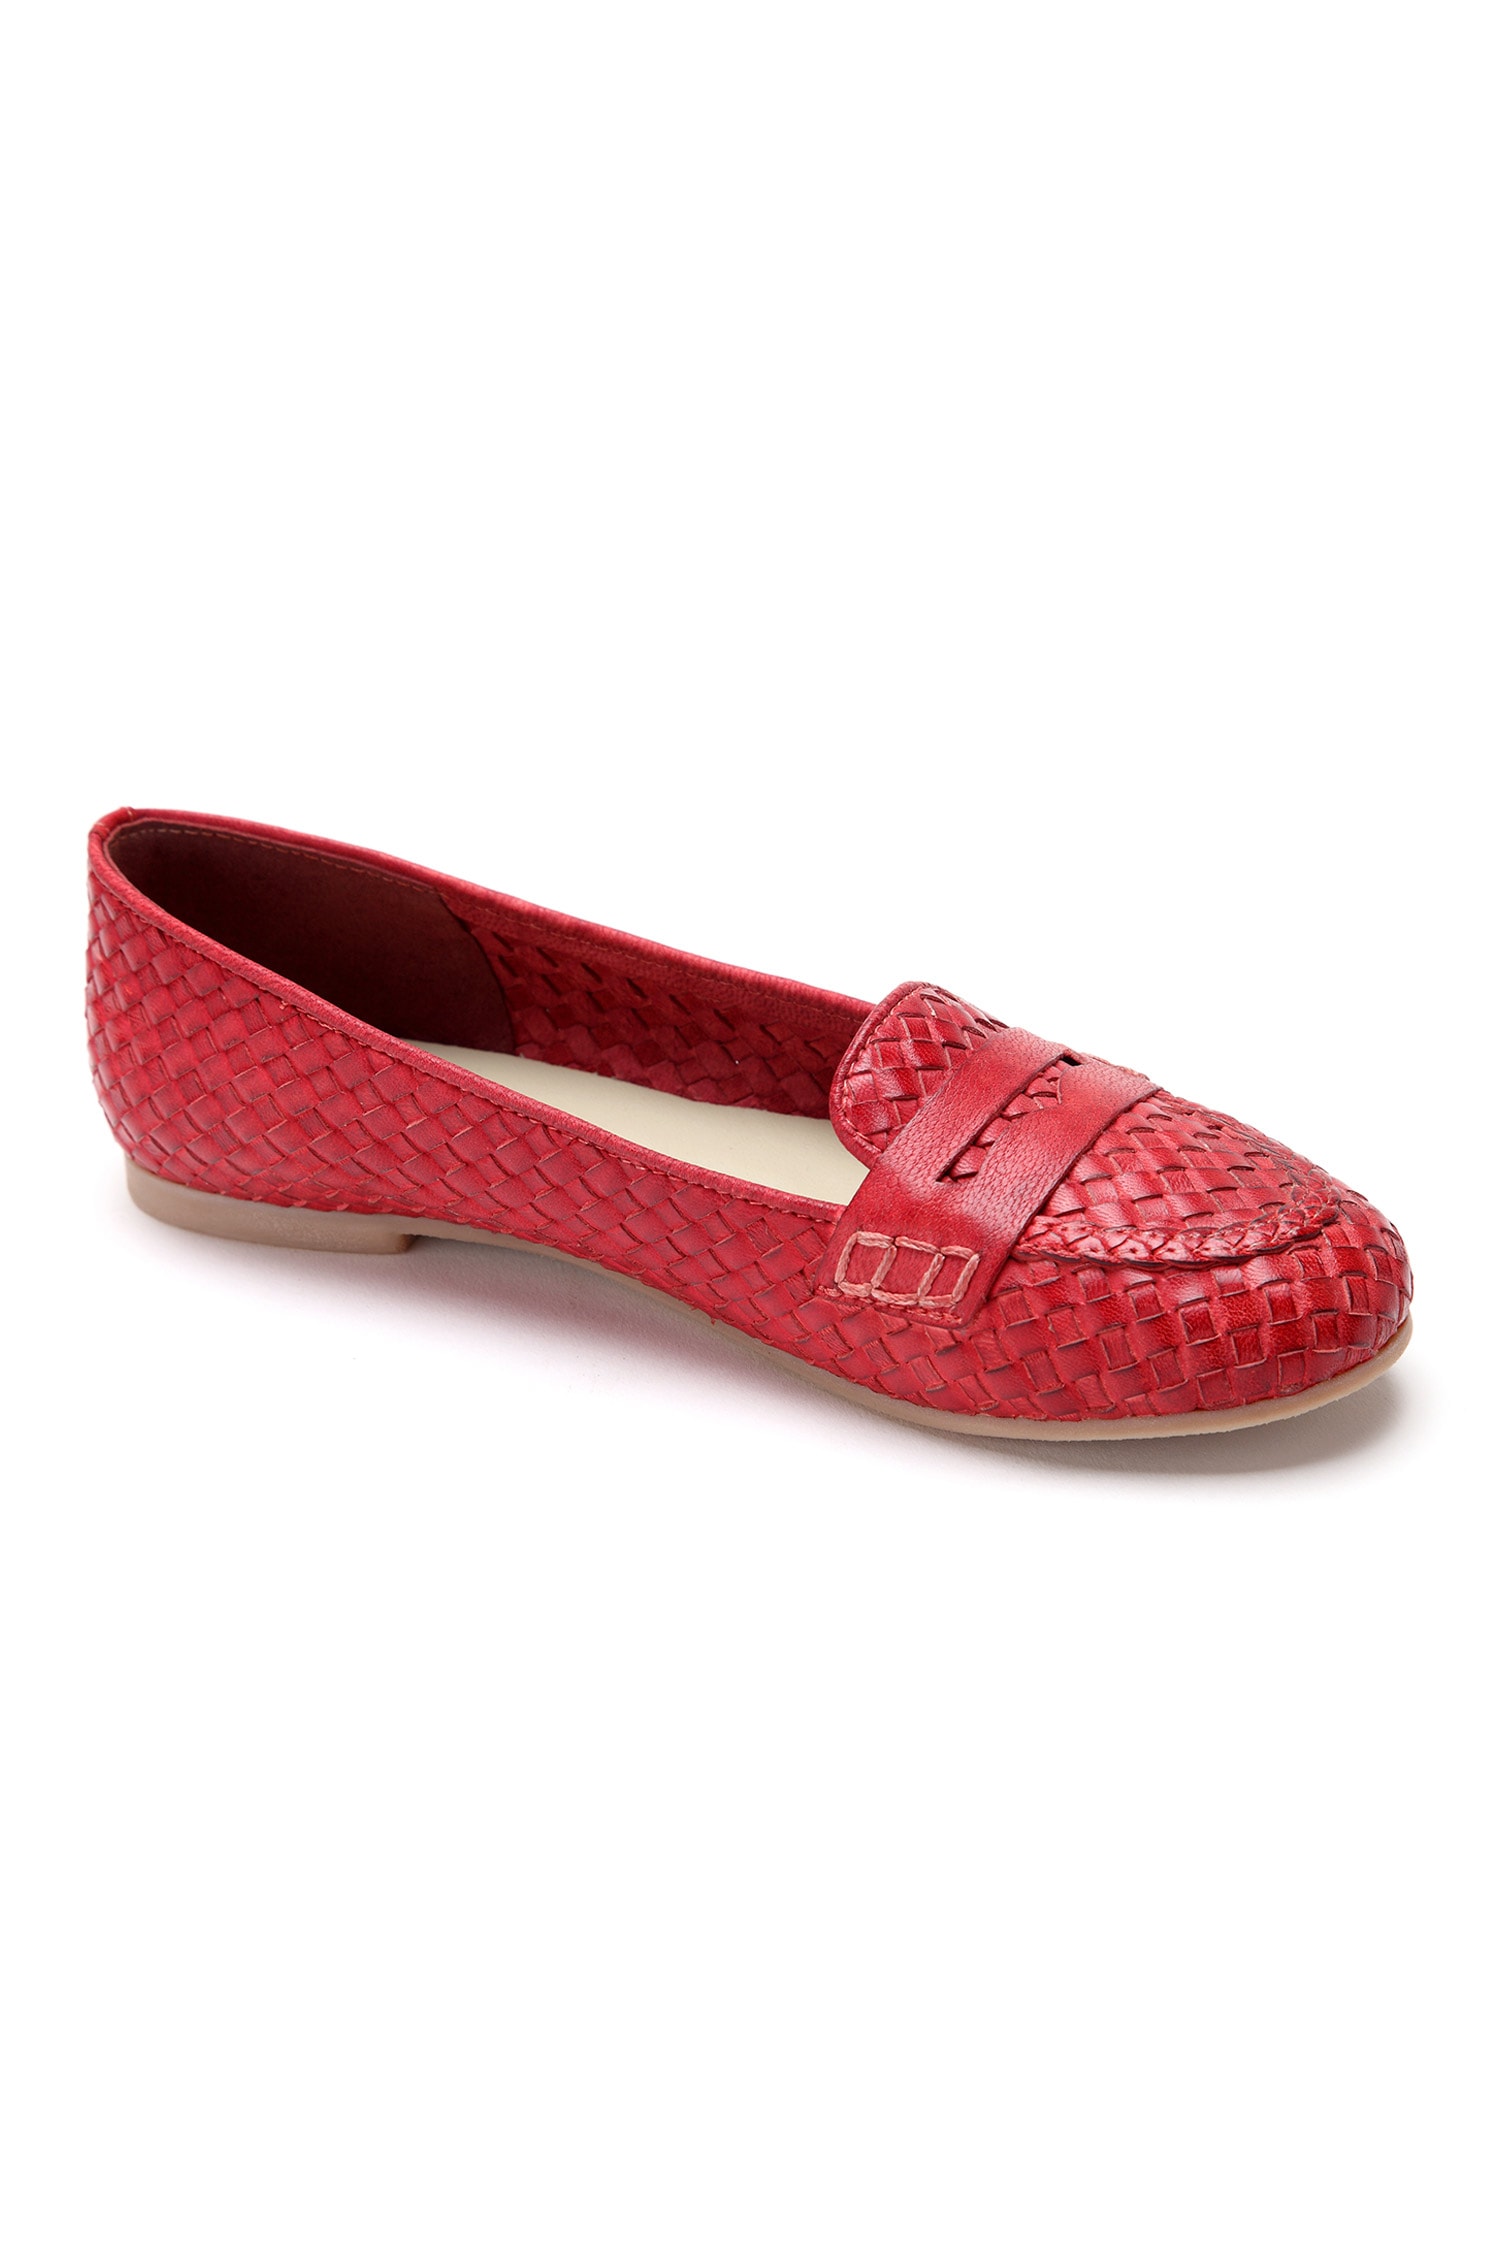 Buy Red Textured Penny Loafers by Tissr Online at Aza Fashions.